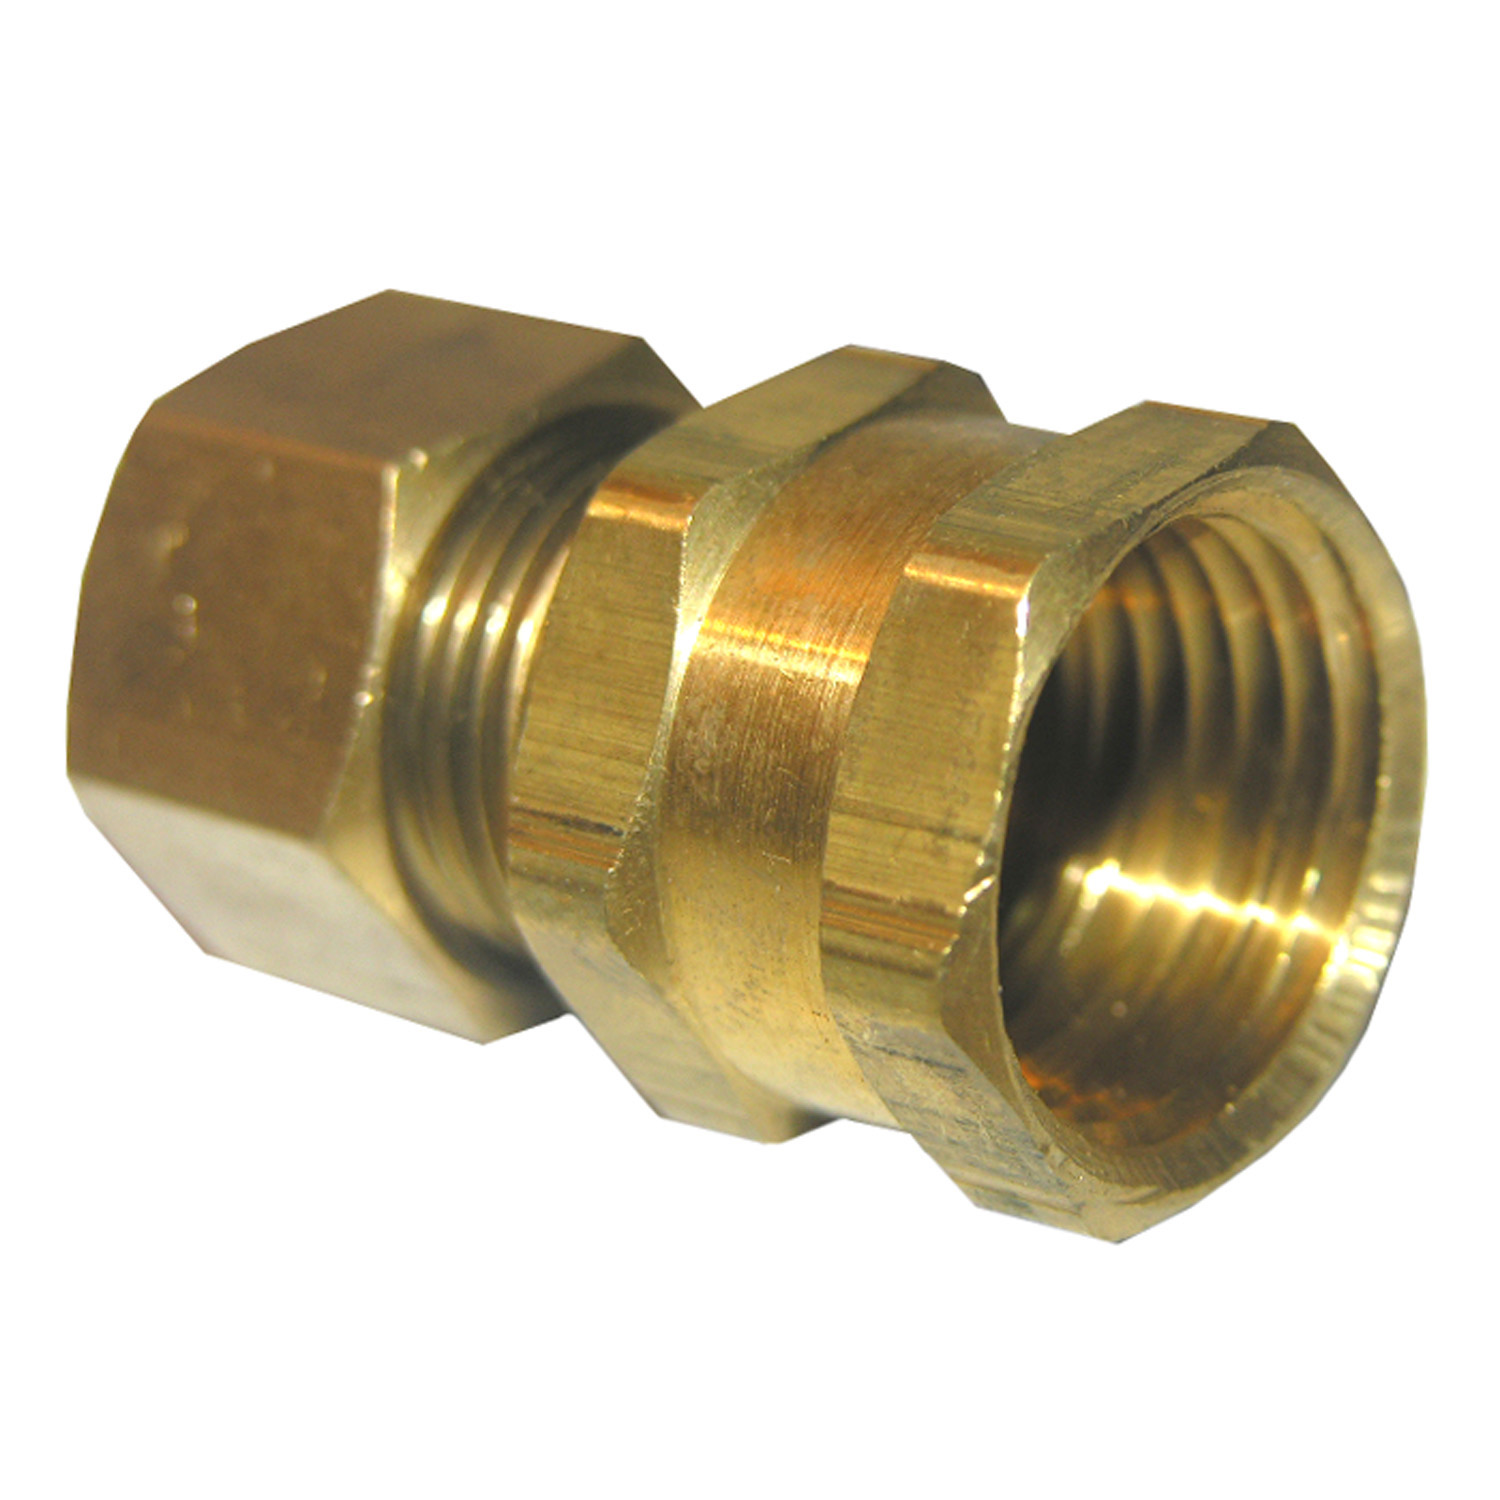 17-6651 Pipe Adapter, 1/2 in, Compression x FPT, Brass, 200 psi Pressure